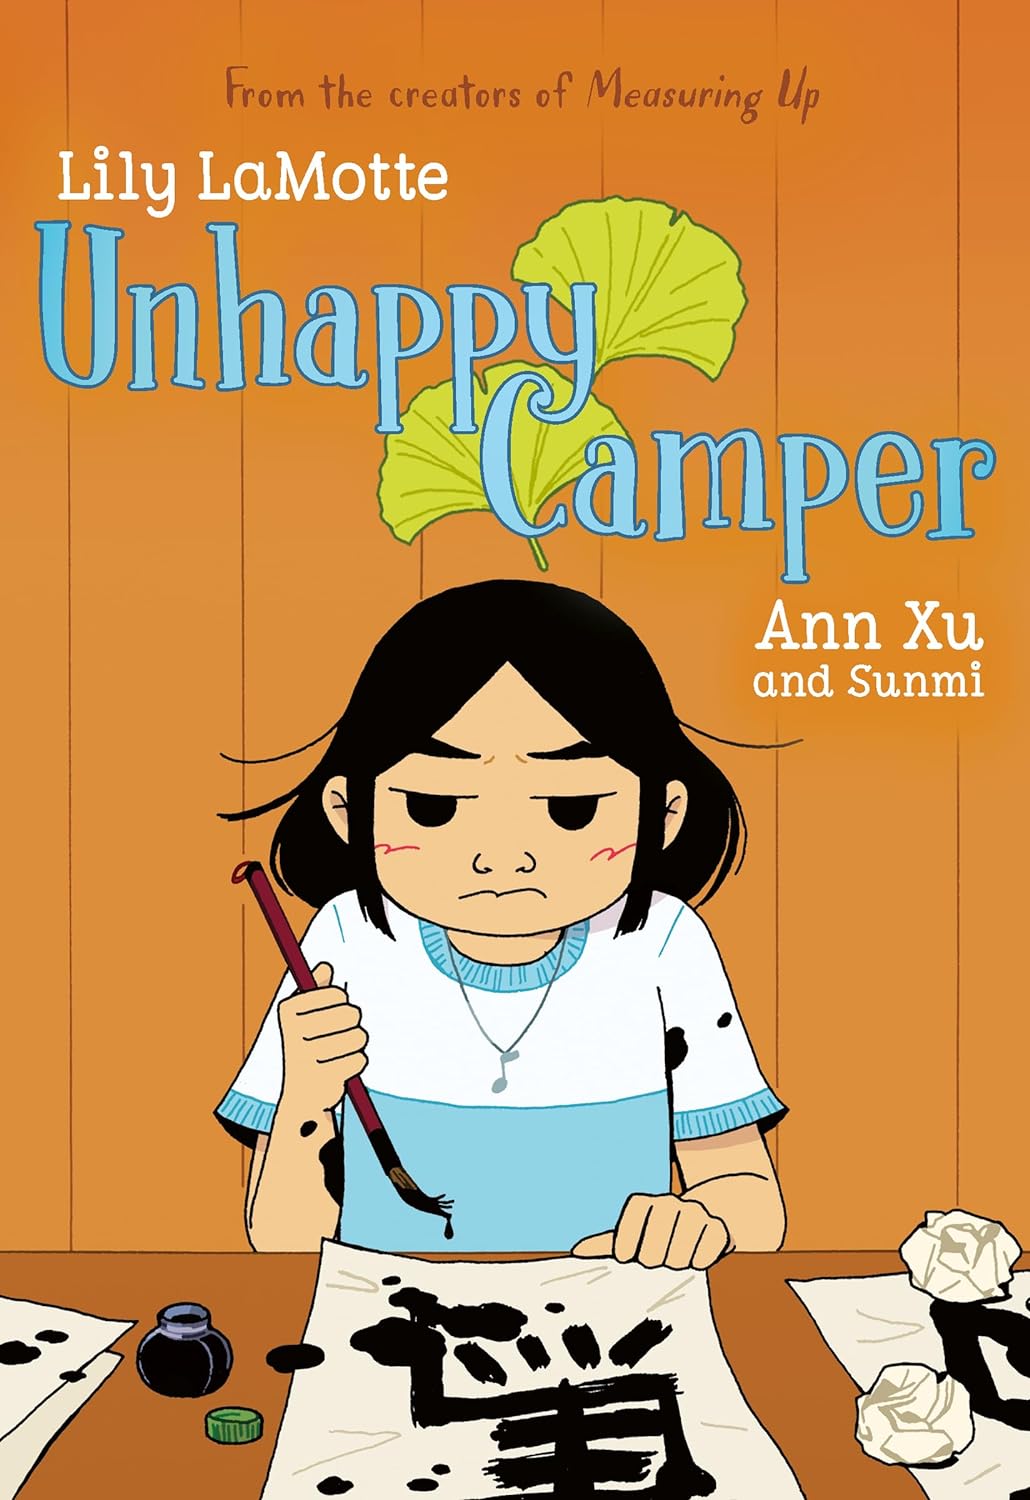 Unhappy Camper, by Lily LaMotte